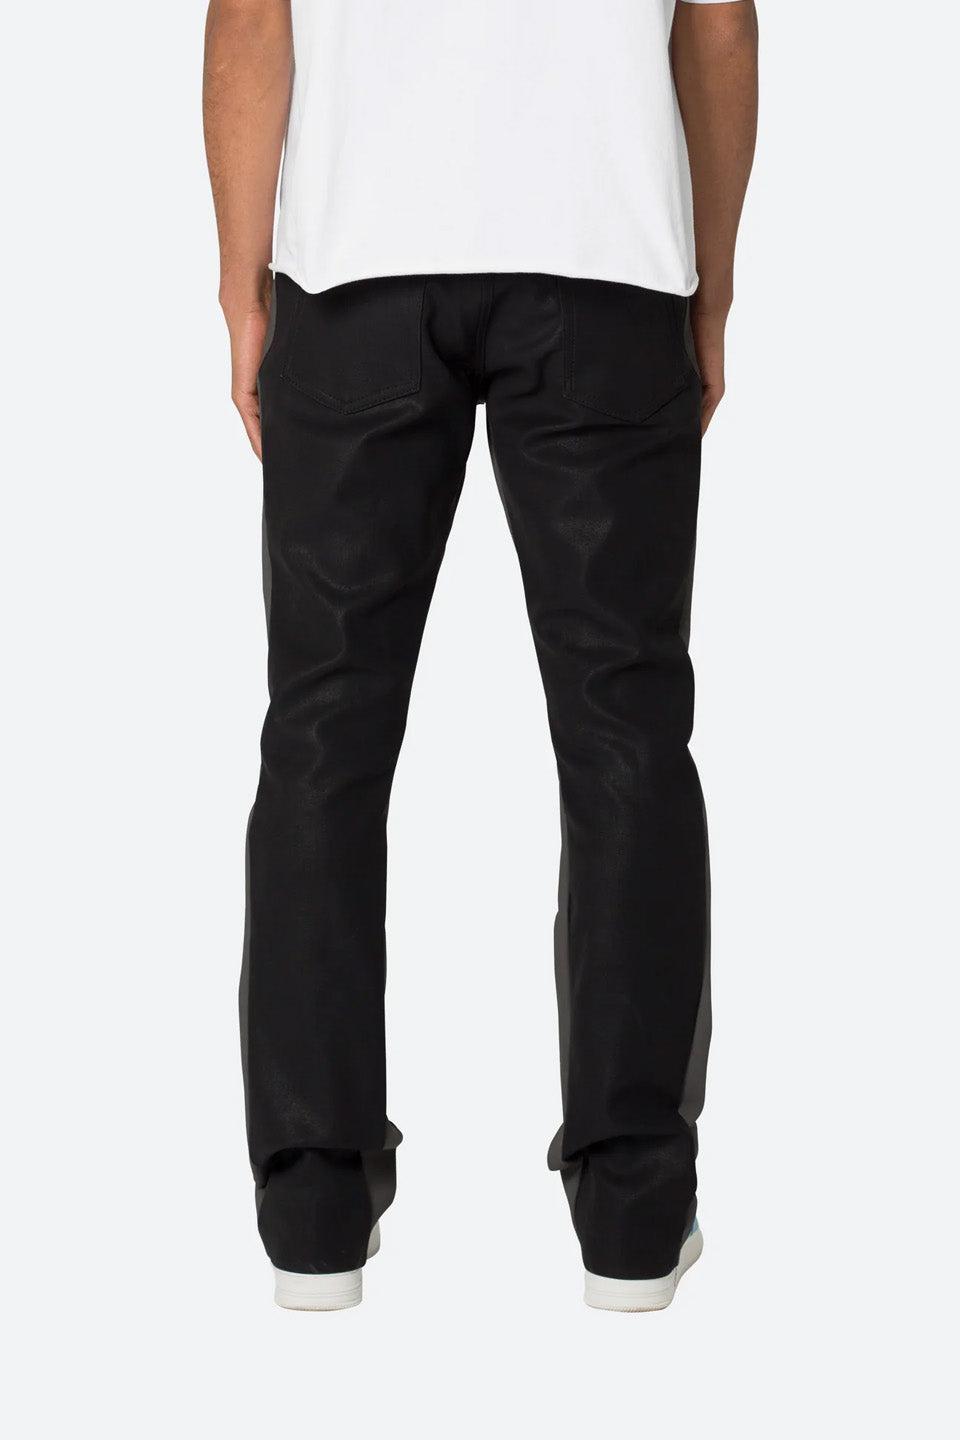 B518 Leather Flare Pants